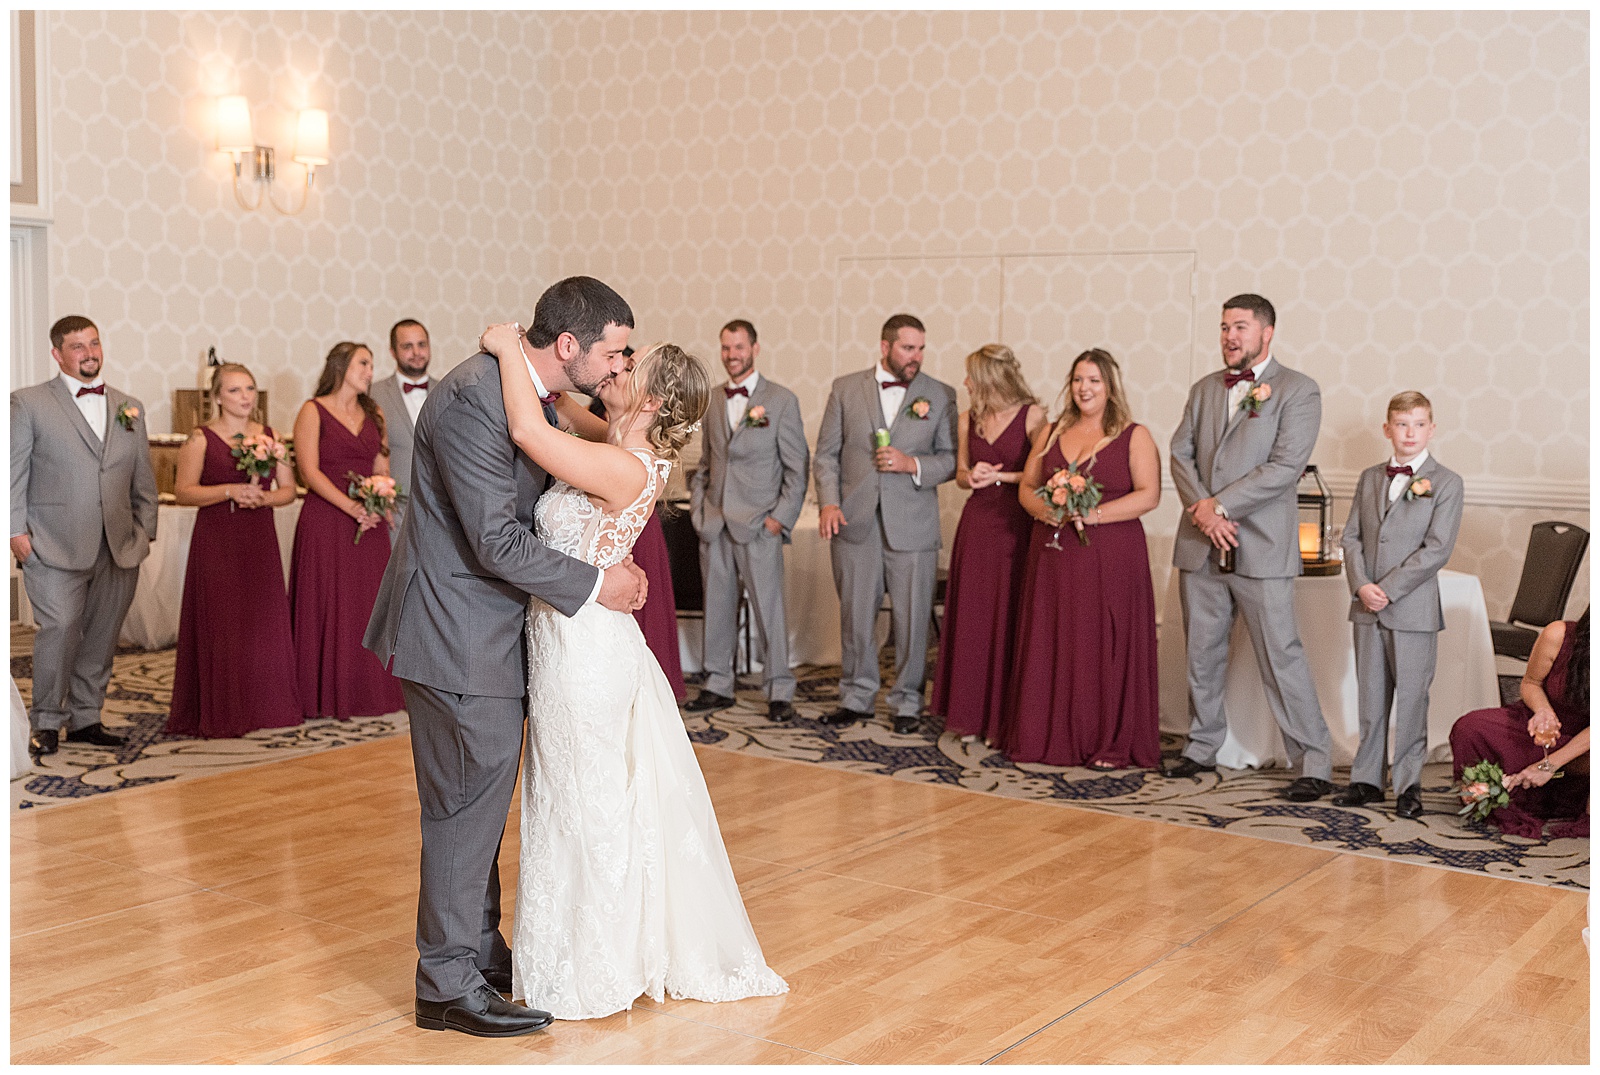 groom and bride hug and kiss during their first dance surrounded by their bridal party